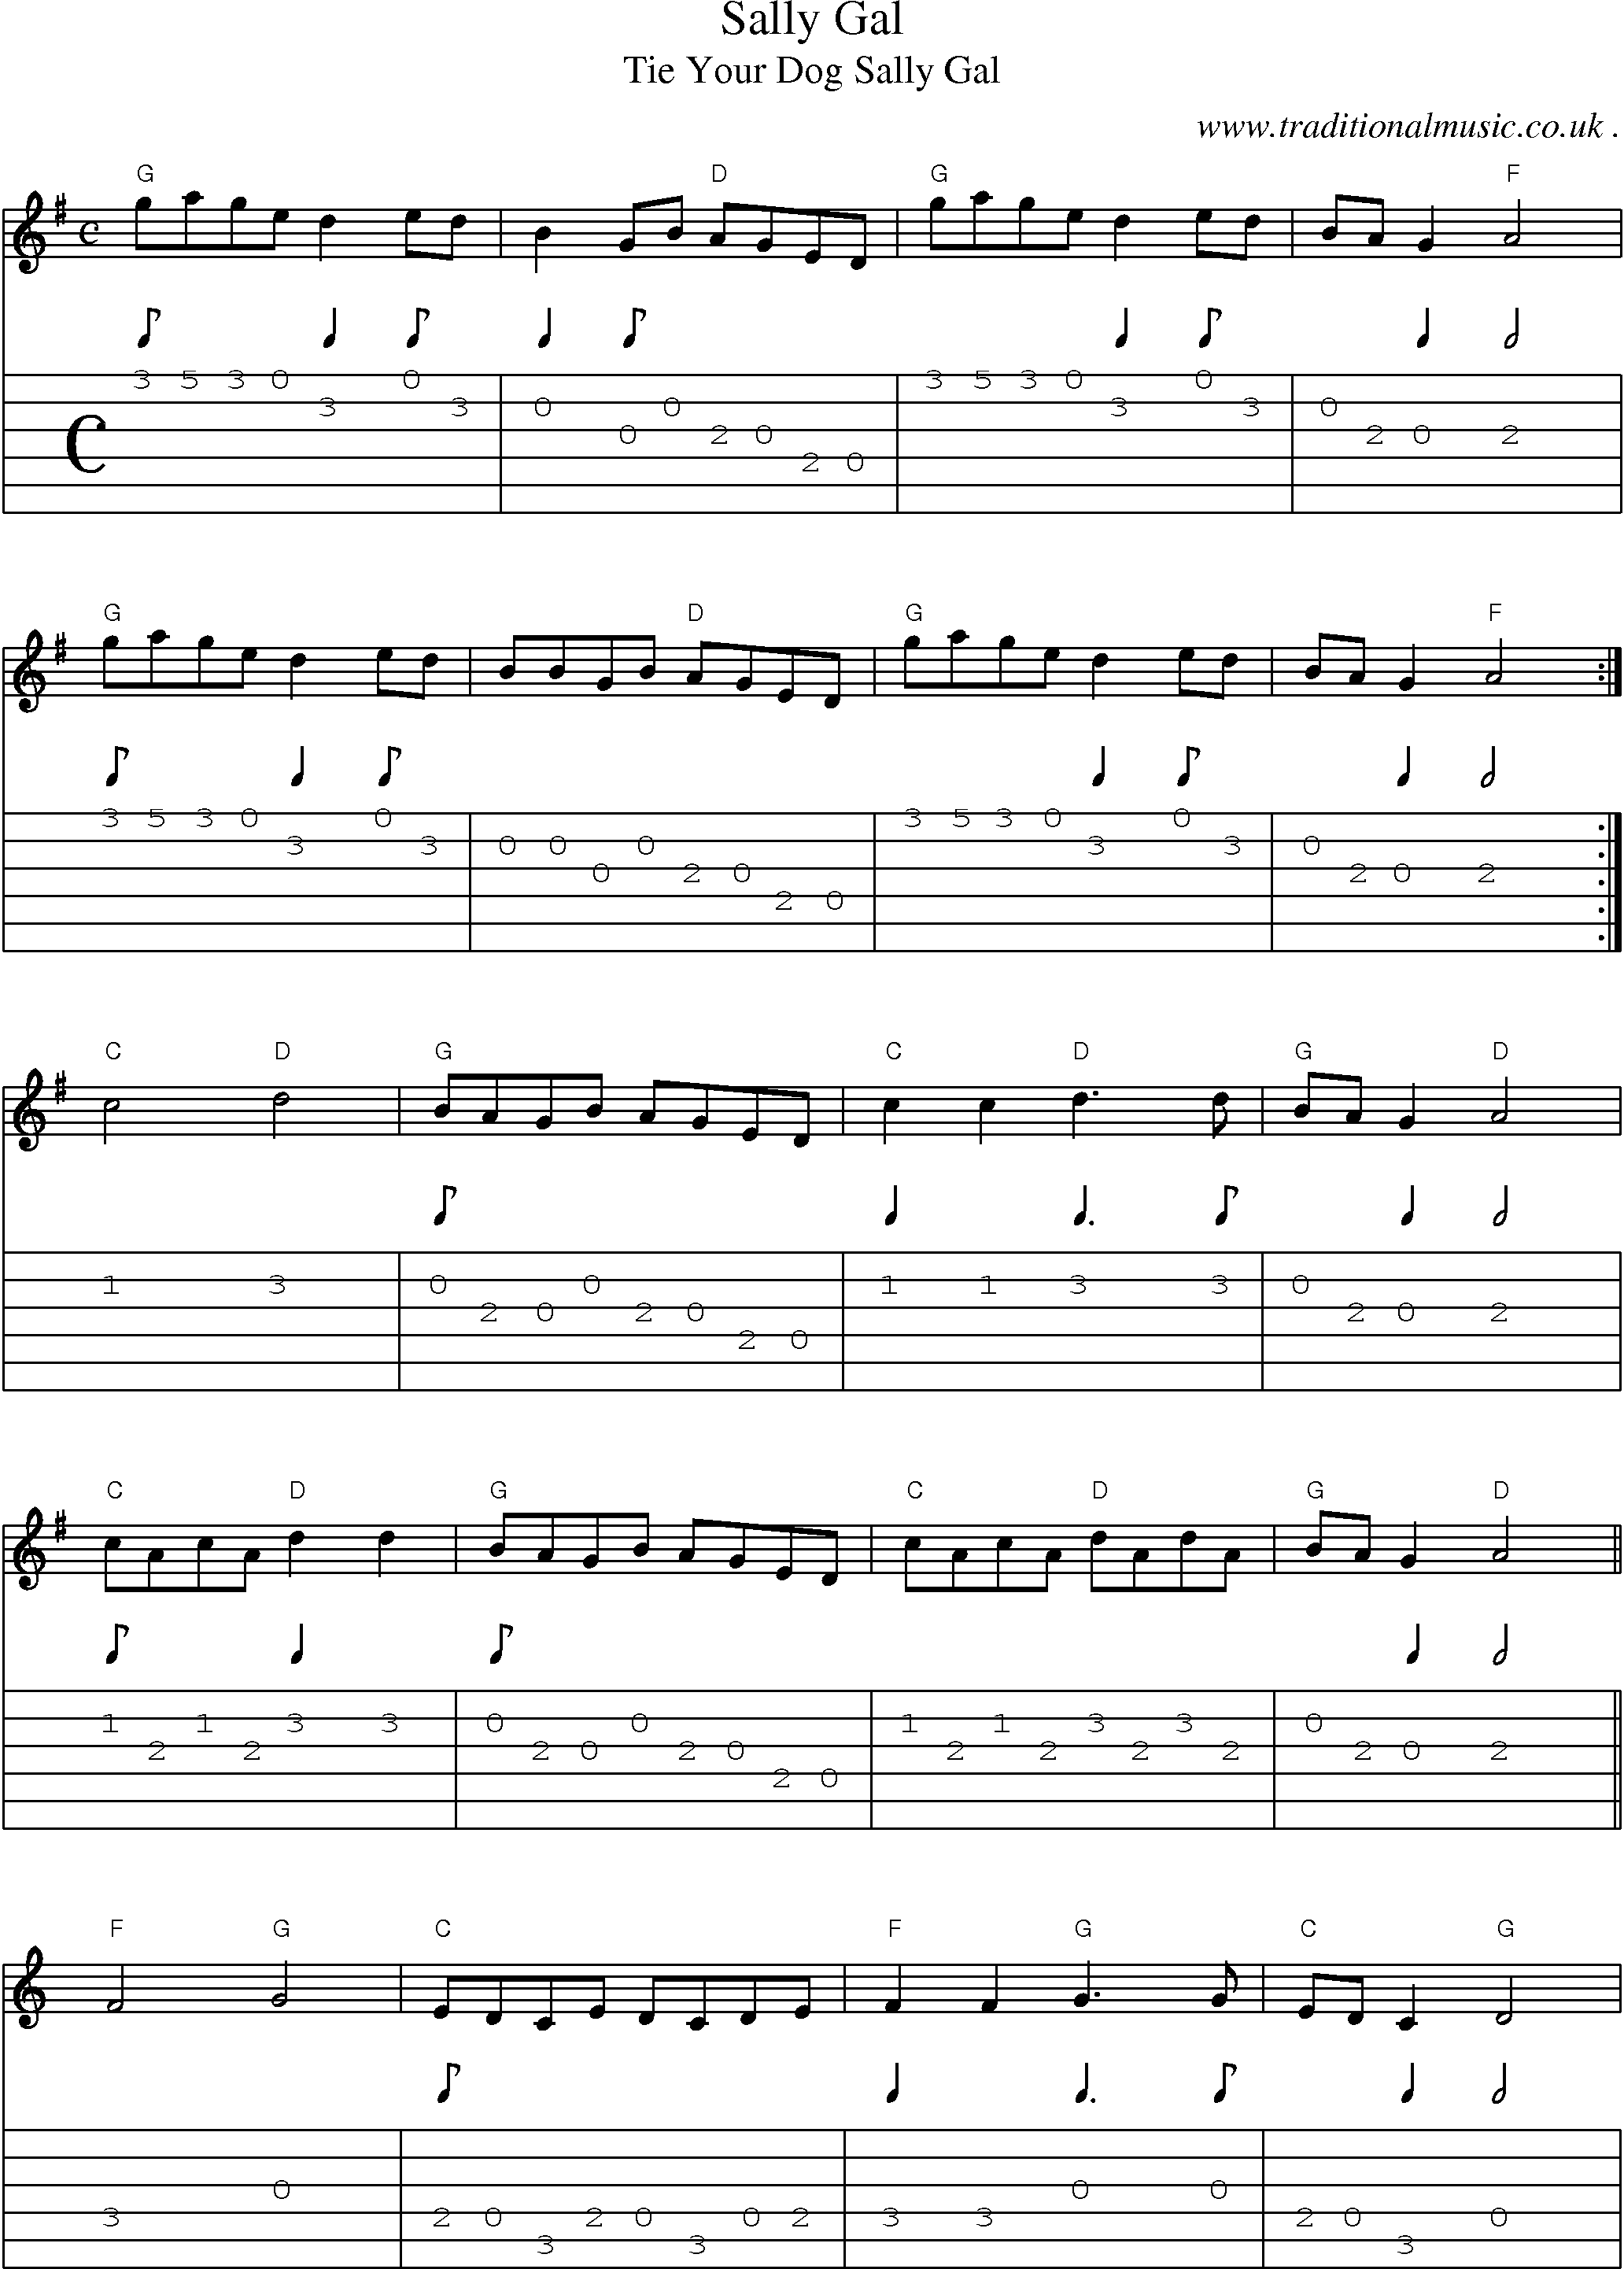 Music Score and Guitar Tabs for Sally Gal